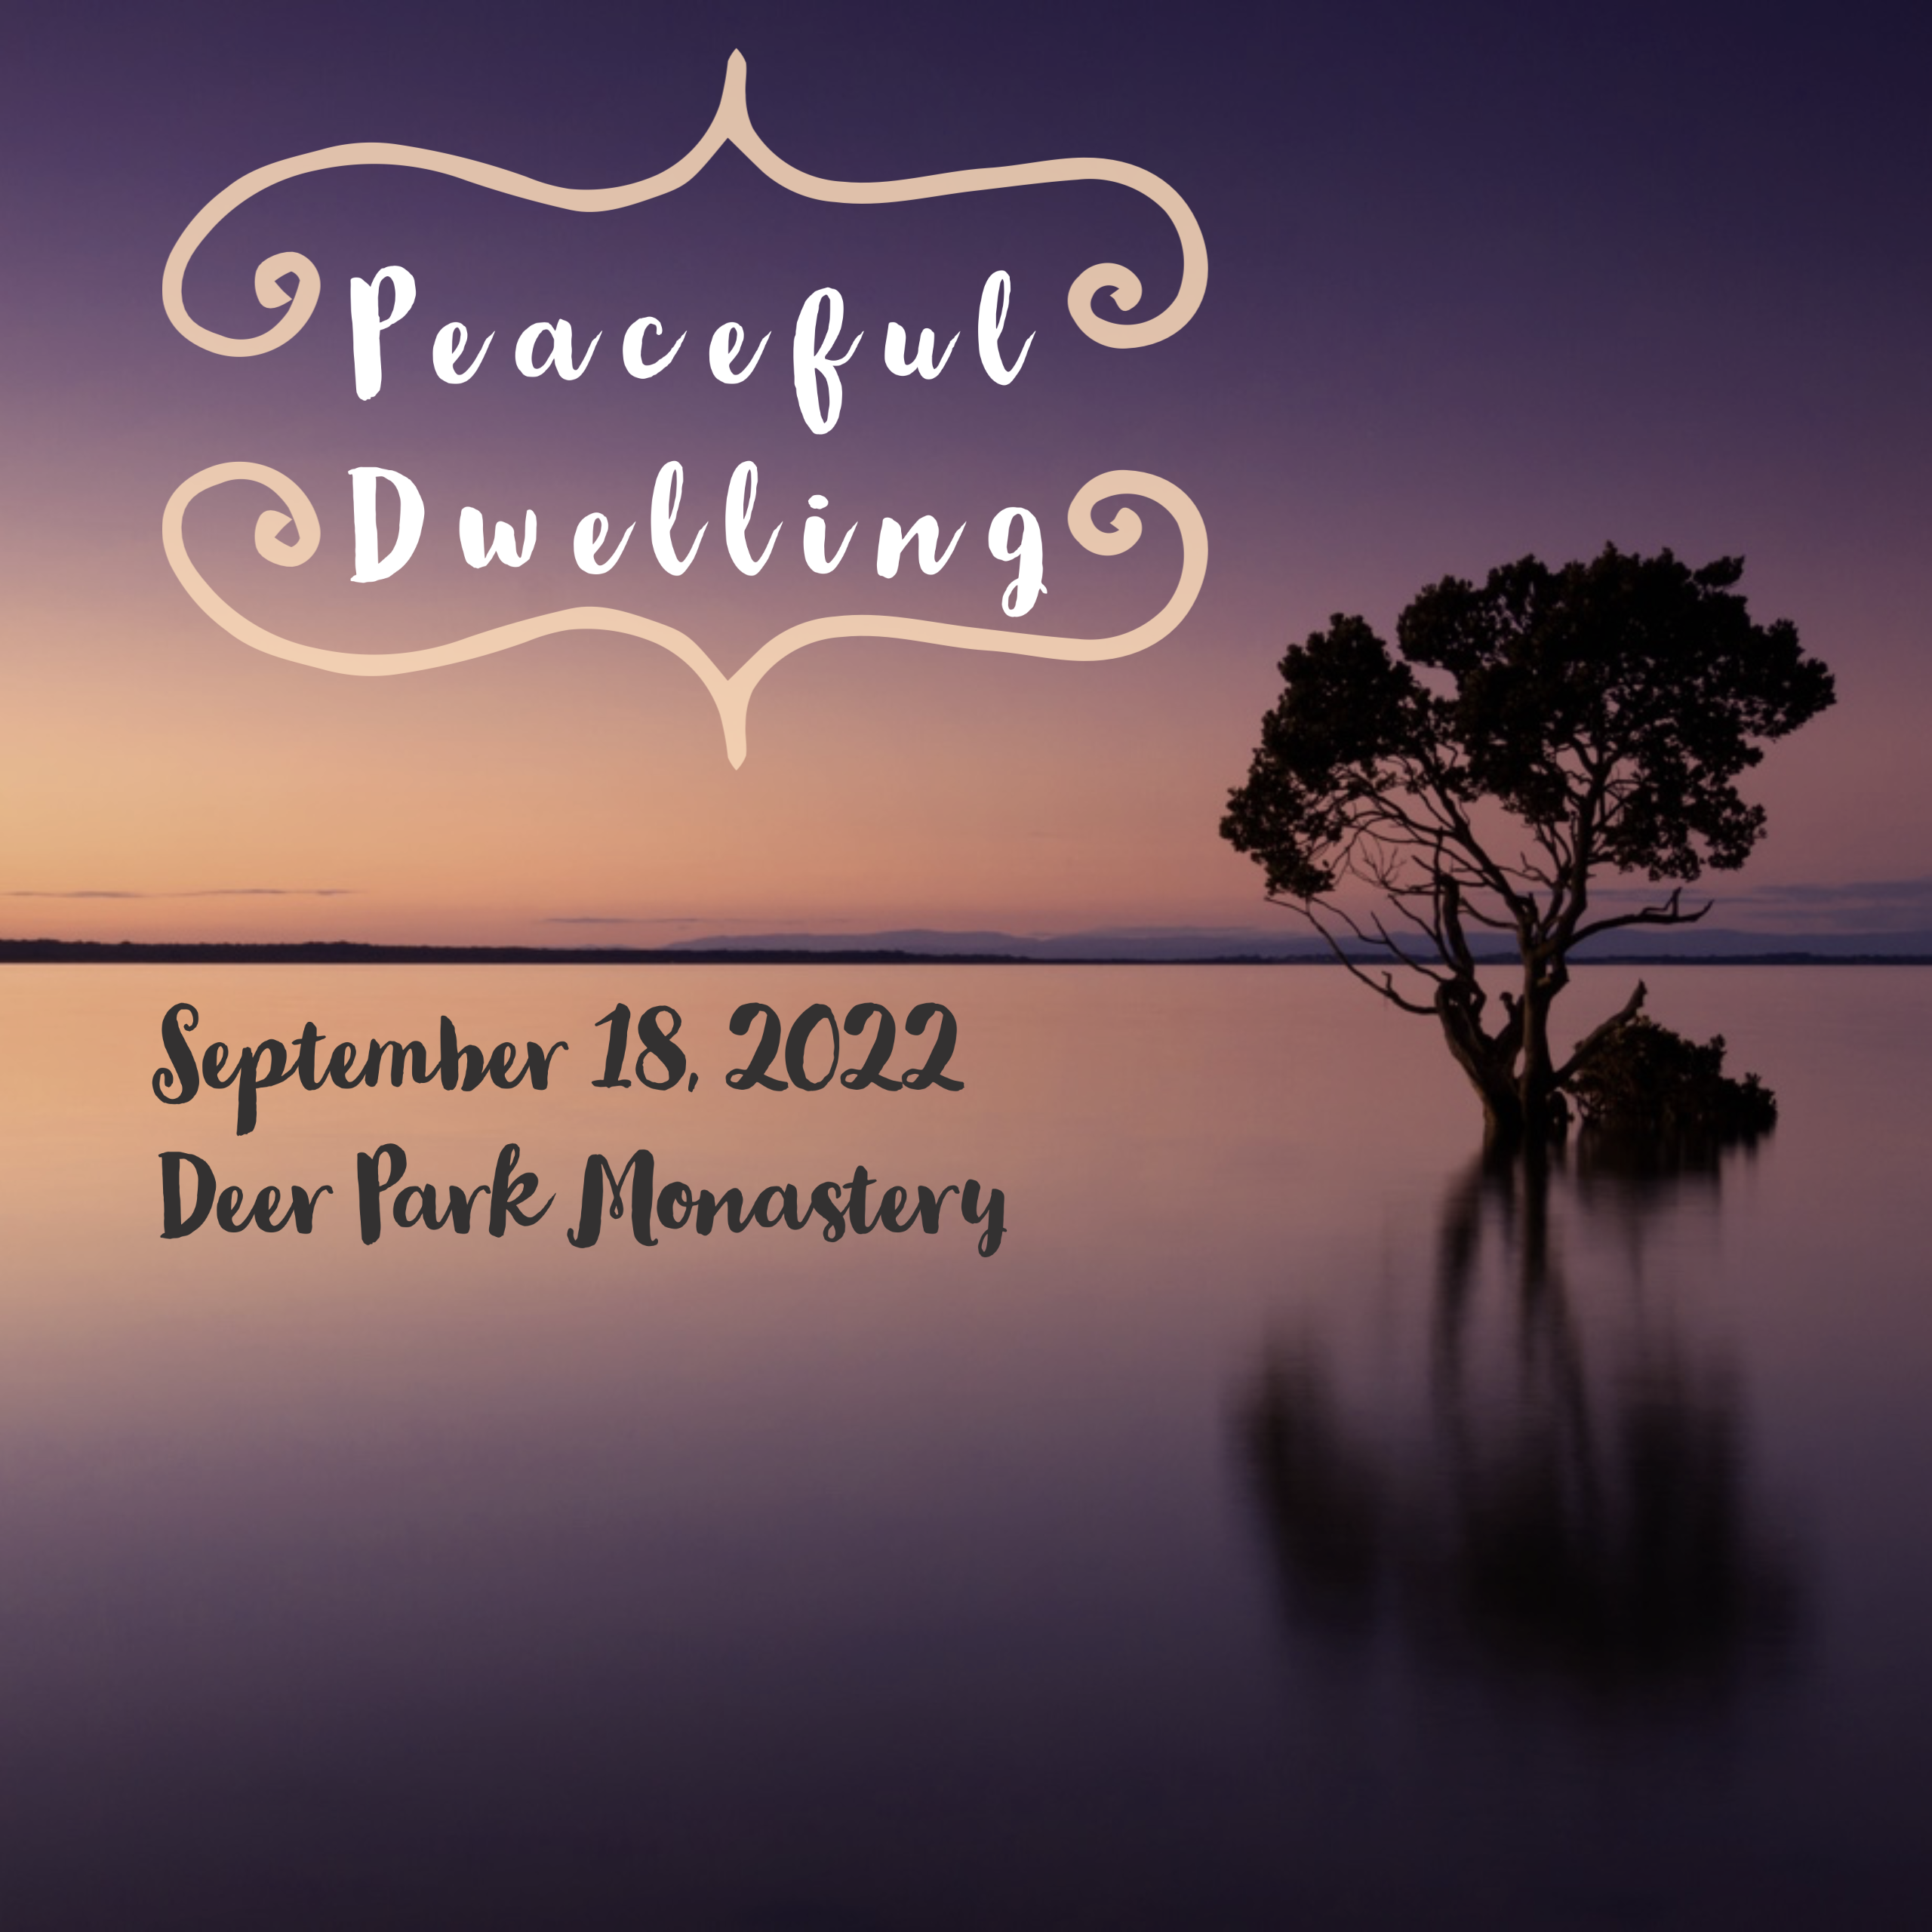 Peaceful Dwelling: A Day of Mindfulness